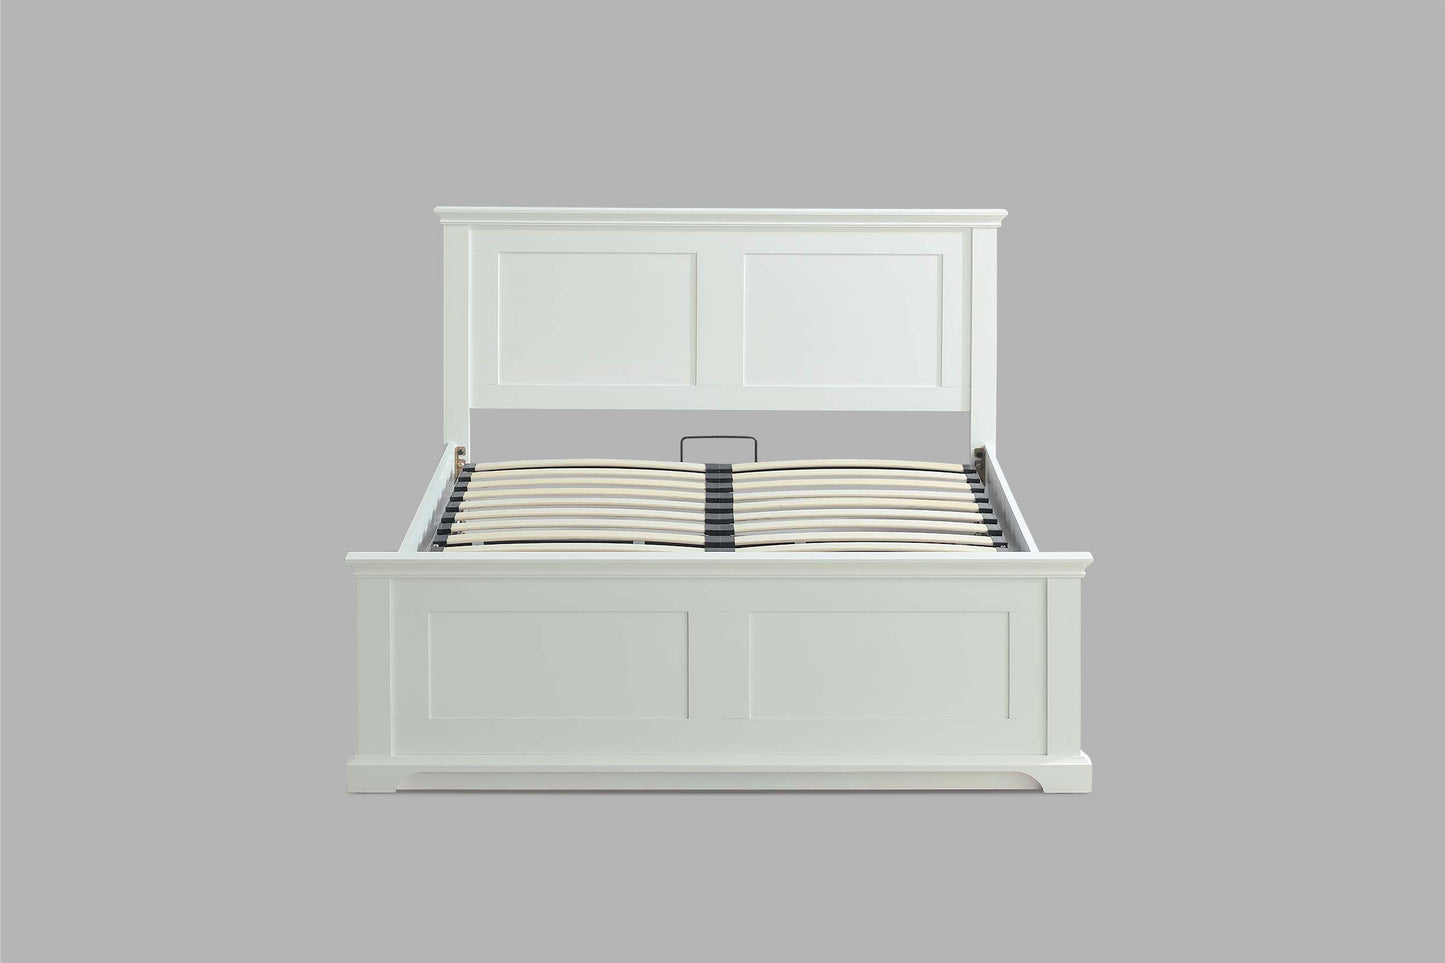 Chambery Bright White Ottoman Storage Bed Frame - 4ft6 Double